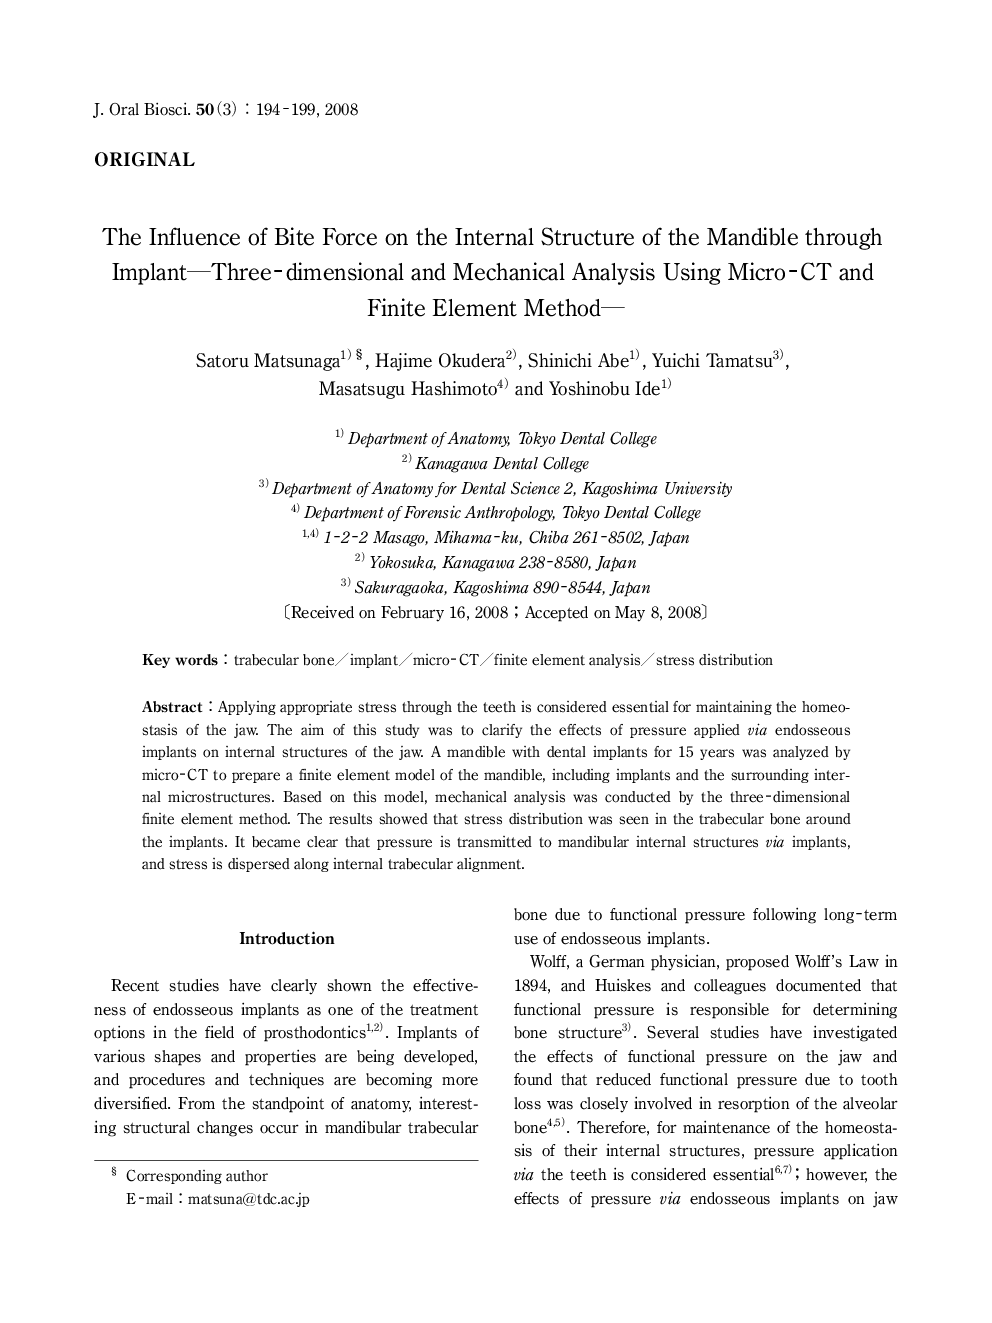 The Influence of Bite Force on the Internal Structure of the Mandible through Implant—Three-dimensional and Mechanical Analysis Using Micro-CT and Finite Element Method—